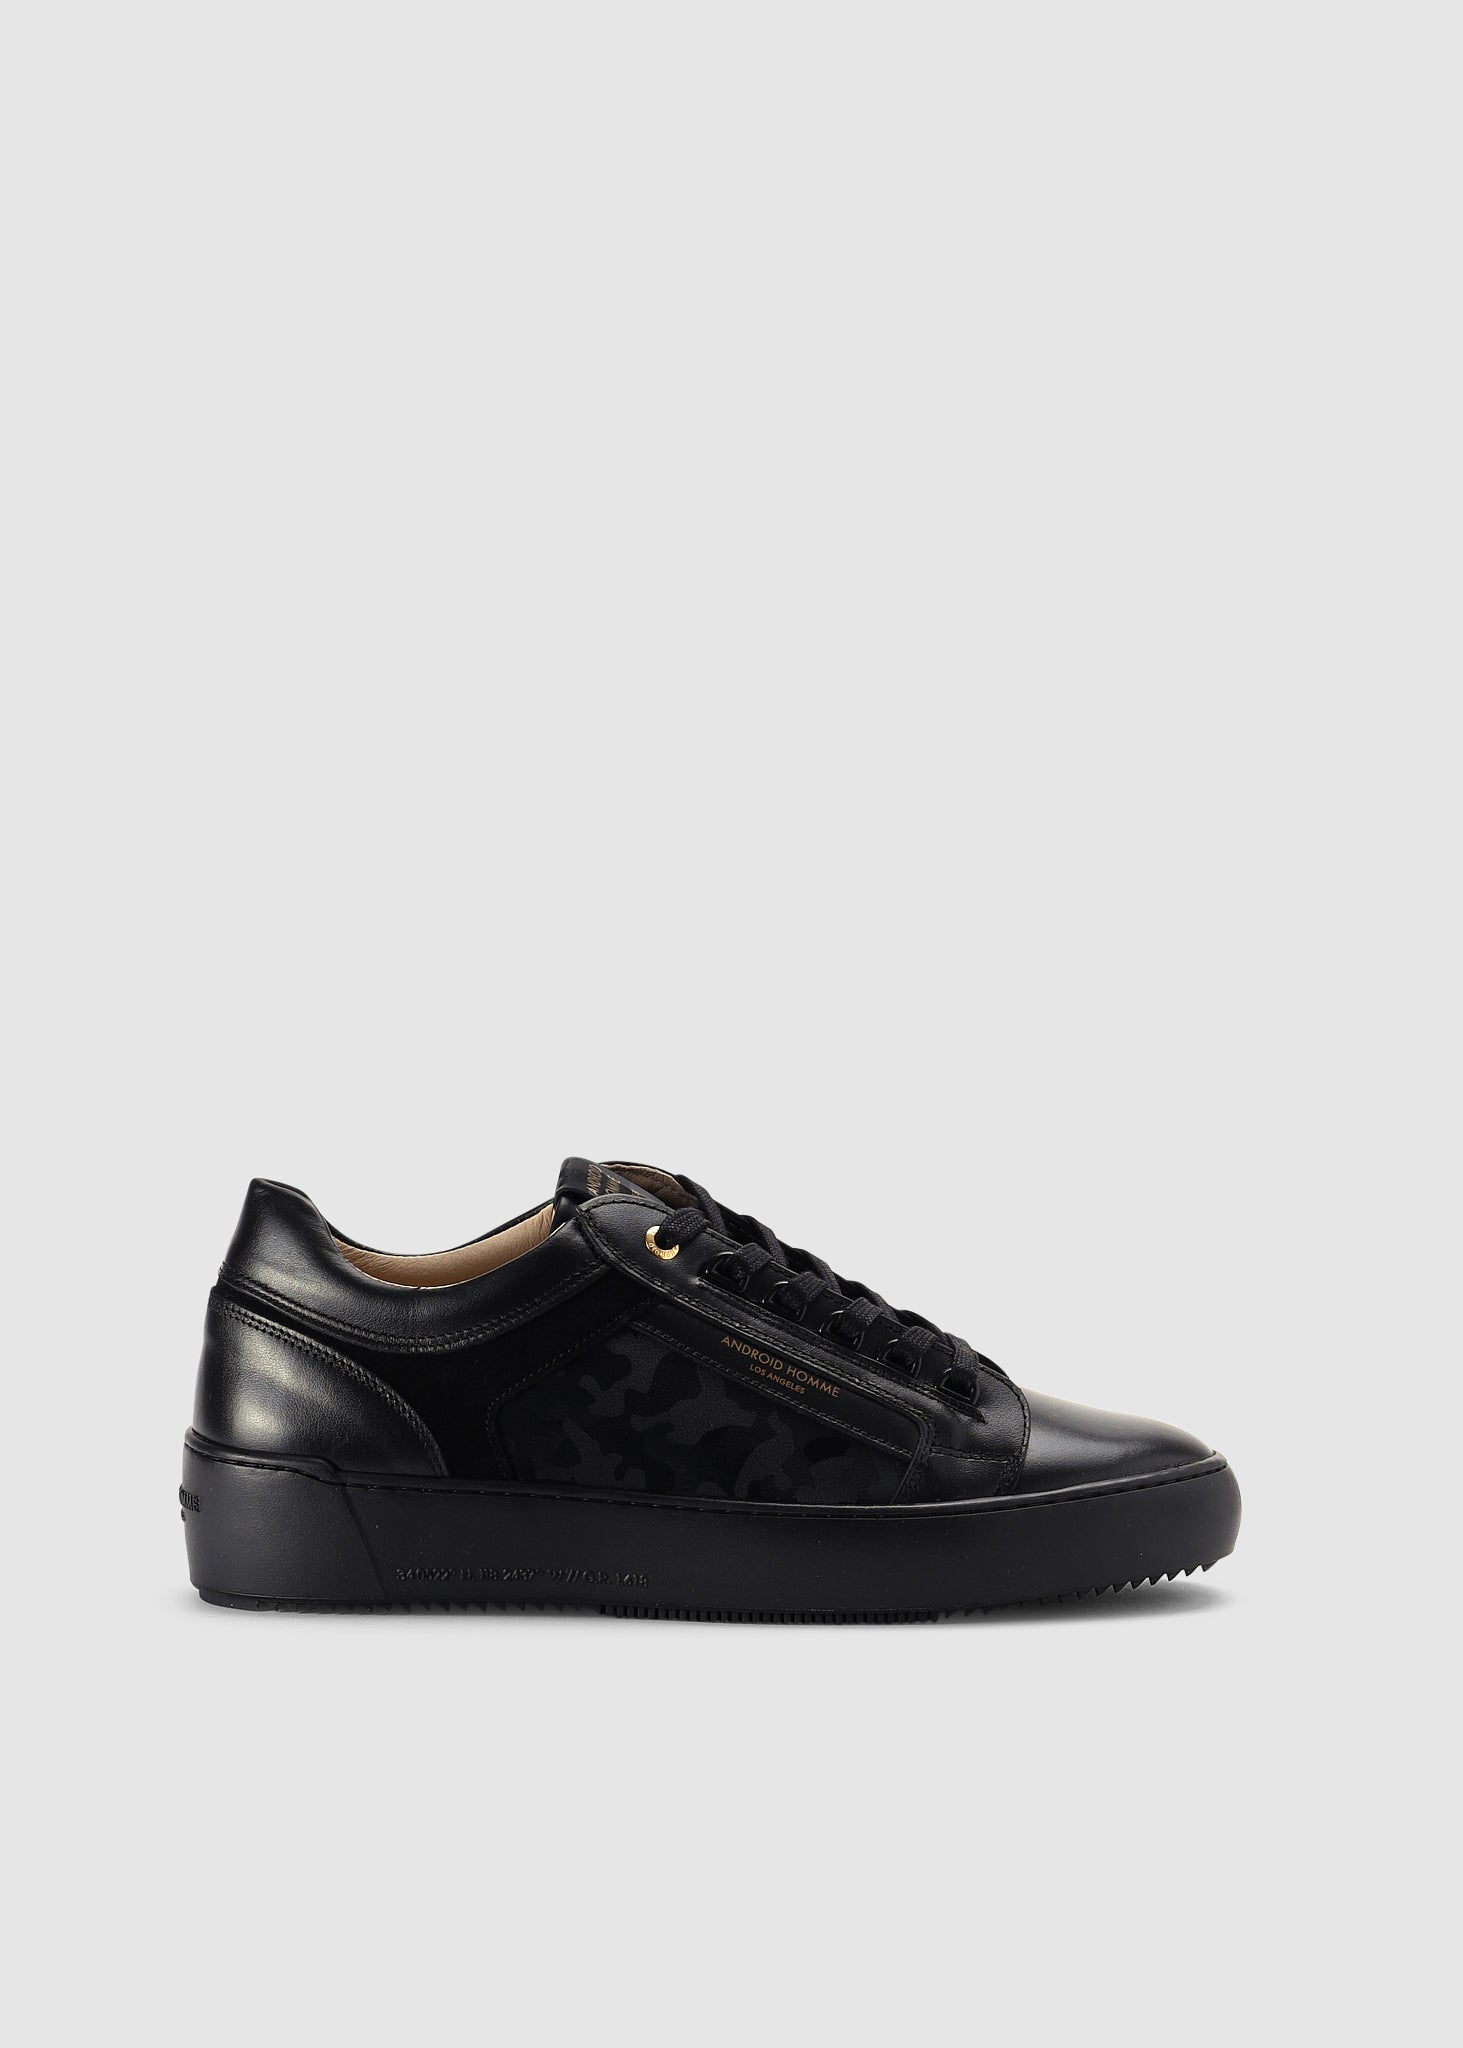 Android Homme Mens Venice Leather Trainers In Black Camo - Black